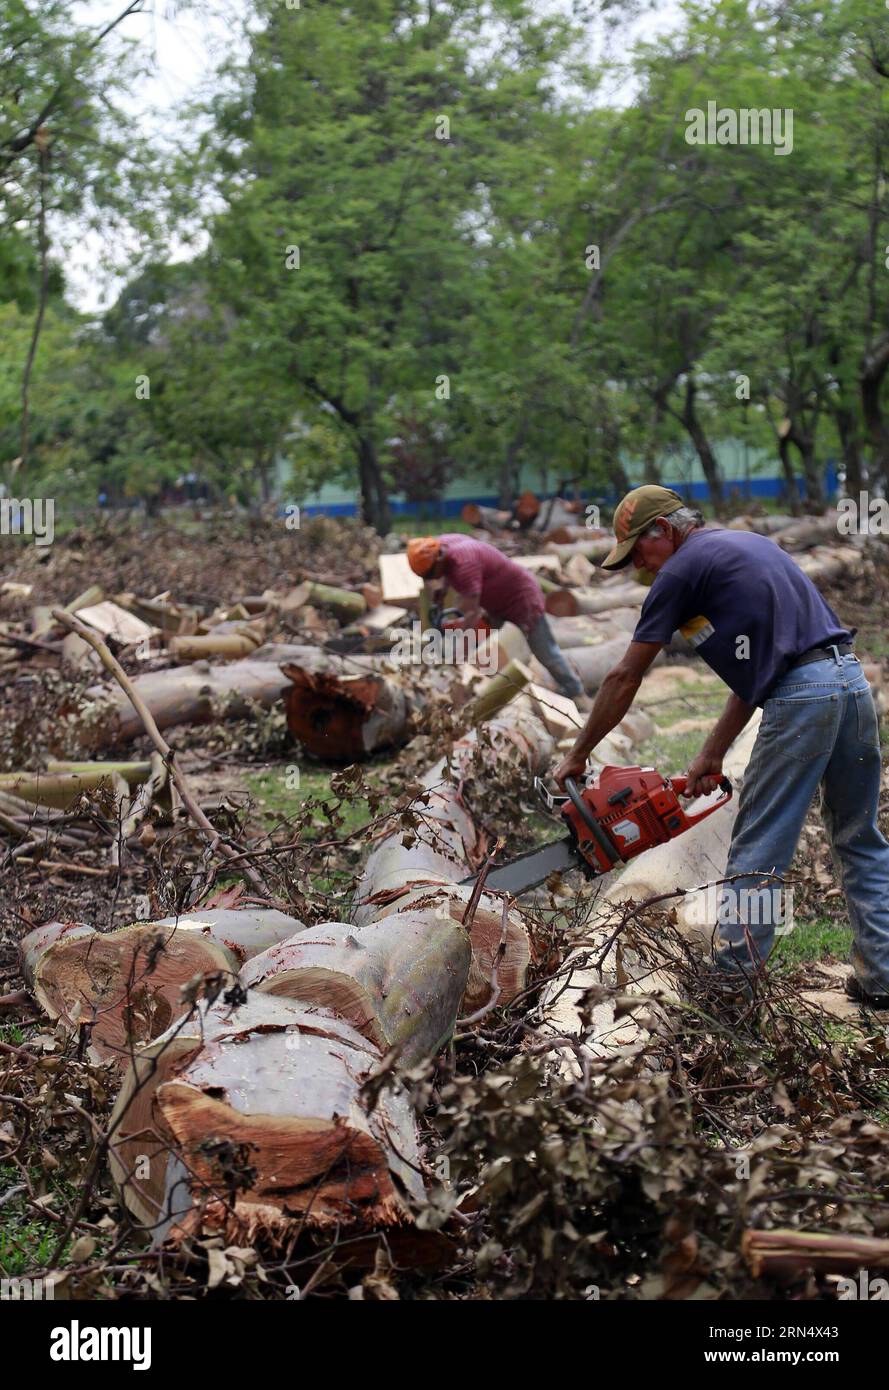 SAN JOSE, June 2, 2015 -- Municipal employees fell eucalyptus trees, not native species of Costa Rica, in La Sabana Park, in San Jose, Costa Rica, on June 2, 2015. The project of the National Institute of Biodiversity seeks to sow about 2,600 trees of 178 native species, such as how ceiba, candelillo, ron ron, ojochillo, nazareno and guayacan real, in order to attract to 130 species of birds and insects. Kent Gilbert) COSTA RICA-SAN JOSE-ENVIRONMENT-BIODIVERSITY e KENTxGILBERT PUBLICATIONxNOTxINxCHN   San Jose June 2 2015 Municipal Employees Fur Eucalyptus Trees Not NATIVE Species of Costa Ric Stock Photo